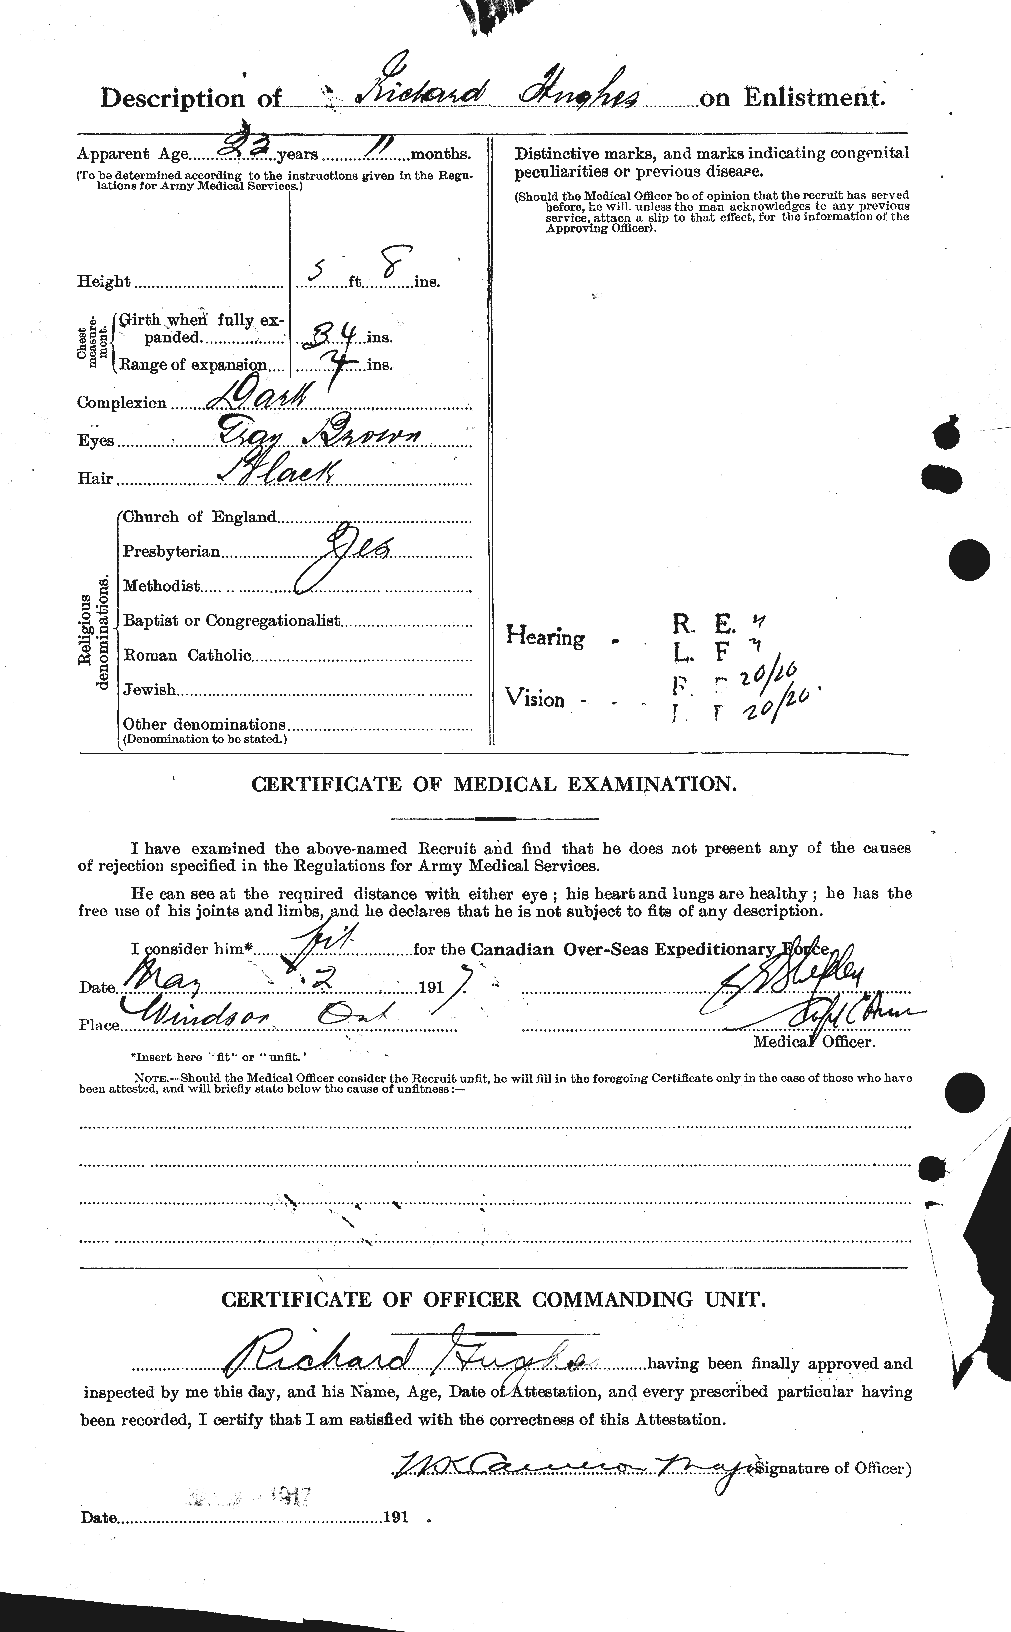 Personnel Records of the First World War - CEF 404182b